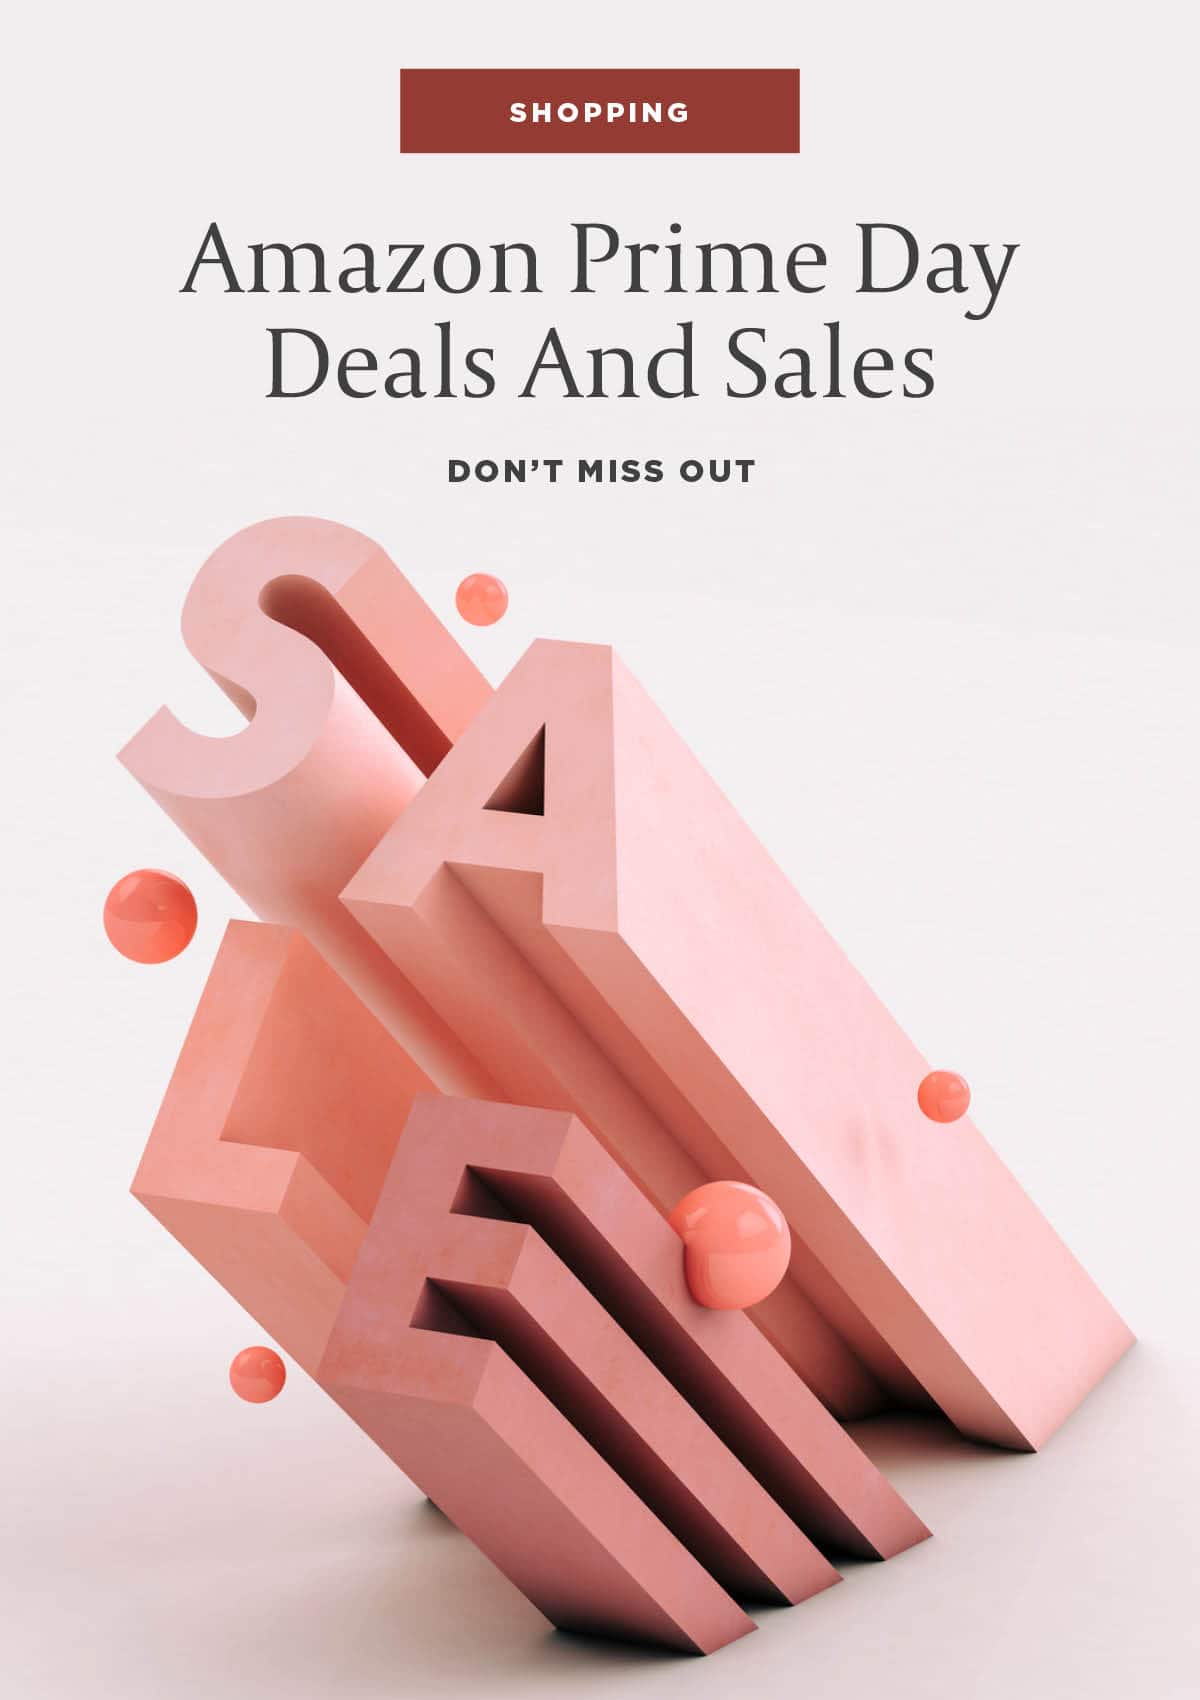 Amazon Prime Day deals and sales